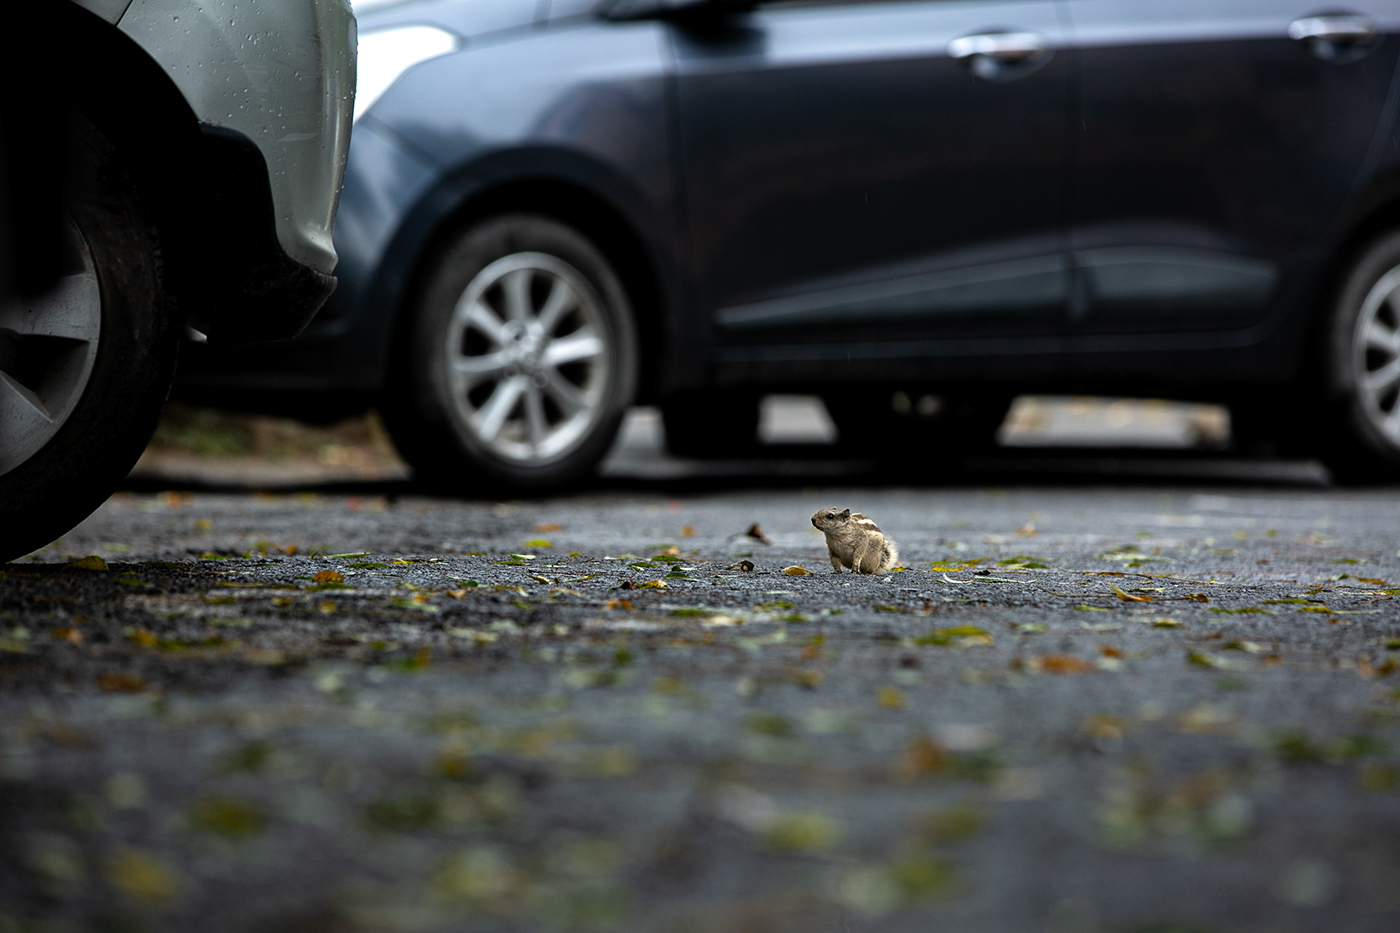 Photography  squirrel nature photography wildlife urbanphotography streetphotography juxtaposition animals cute